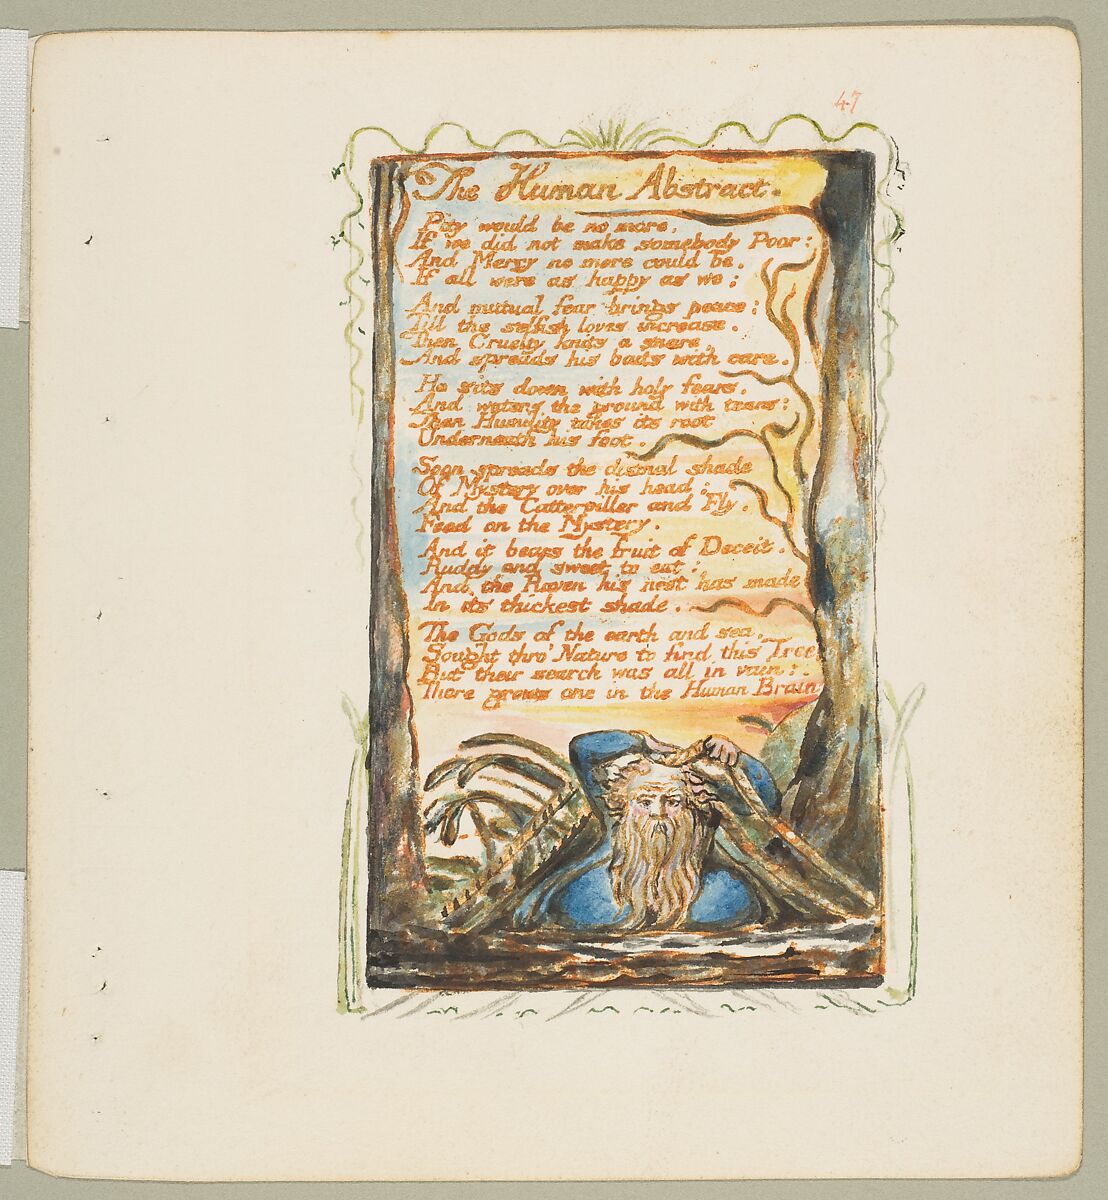 Songs of Experience: The Human Abstract, William Blake, Relief etching printed in orange-brown ink and hand-colored with watercolor and shell gold